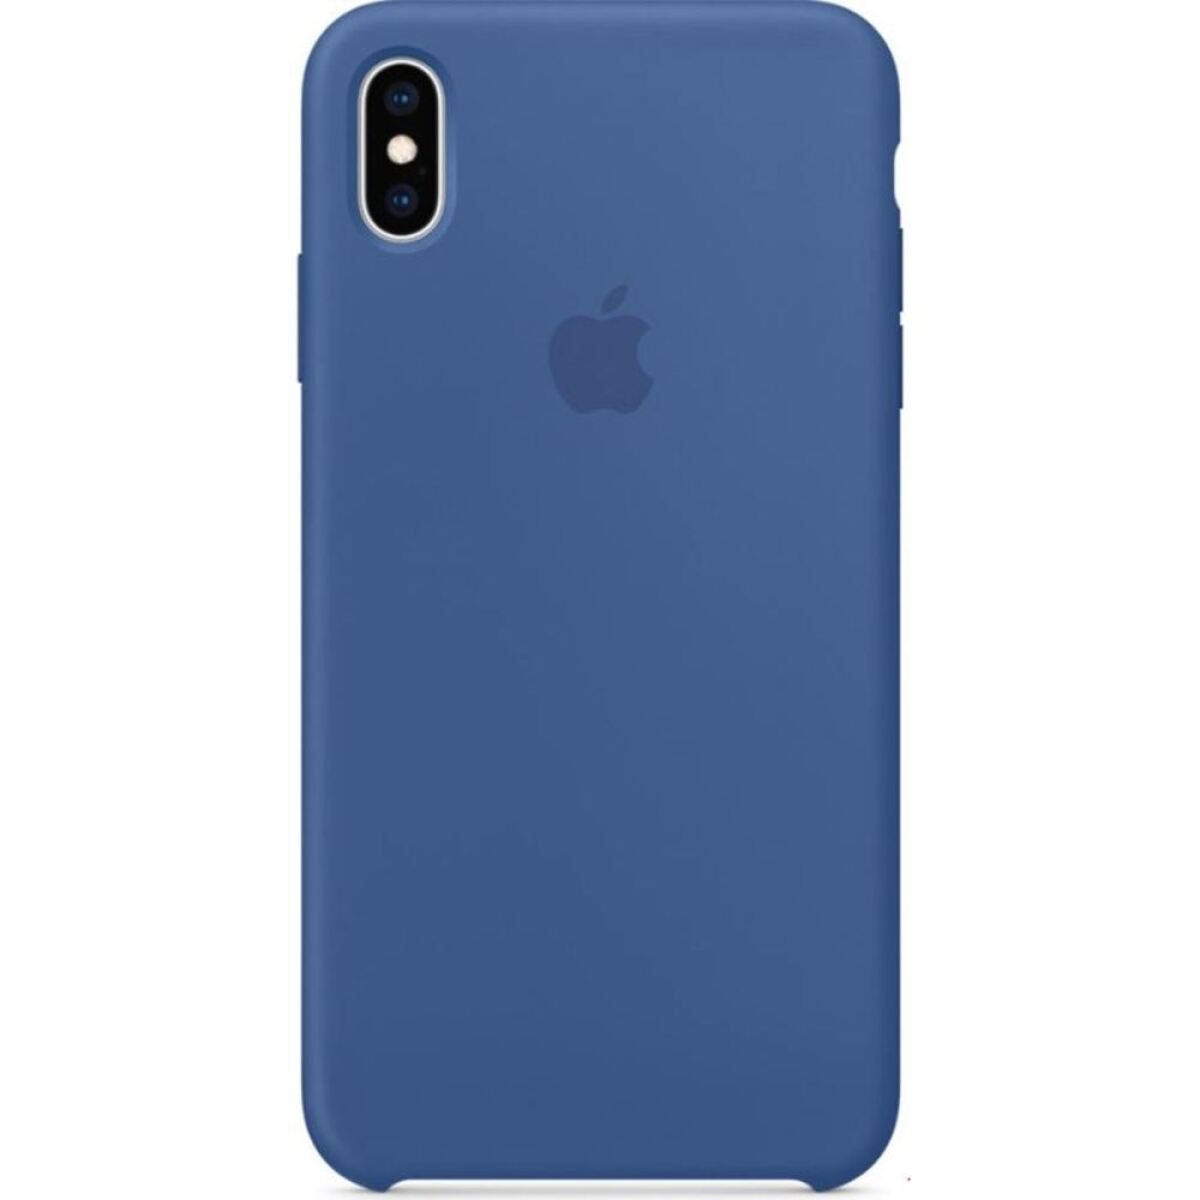 blau, SILICONE Pro iPhone Full Blau Cover, Max Apple, Pro 11 iPhone 11 FORCELL Max,